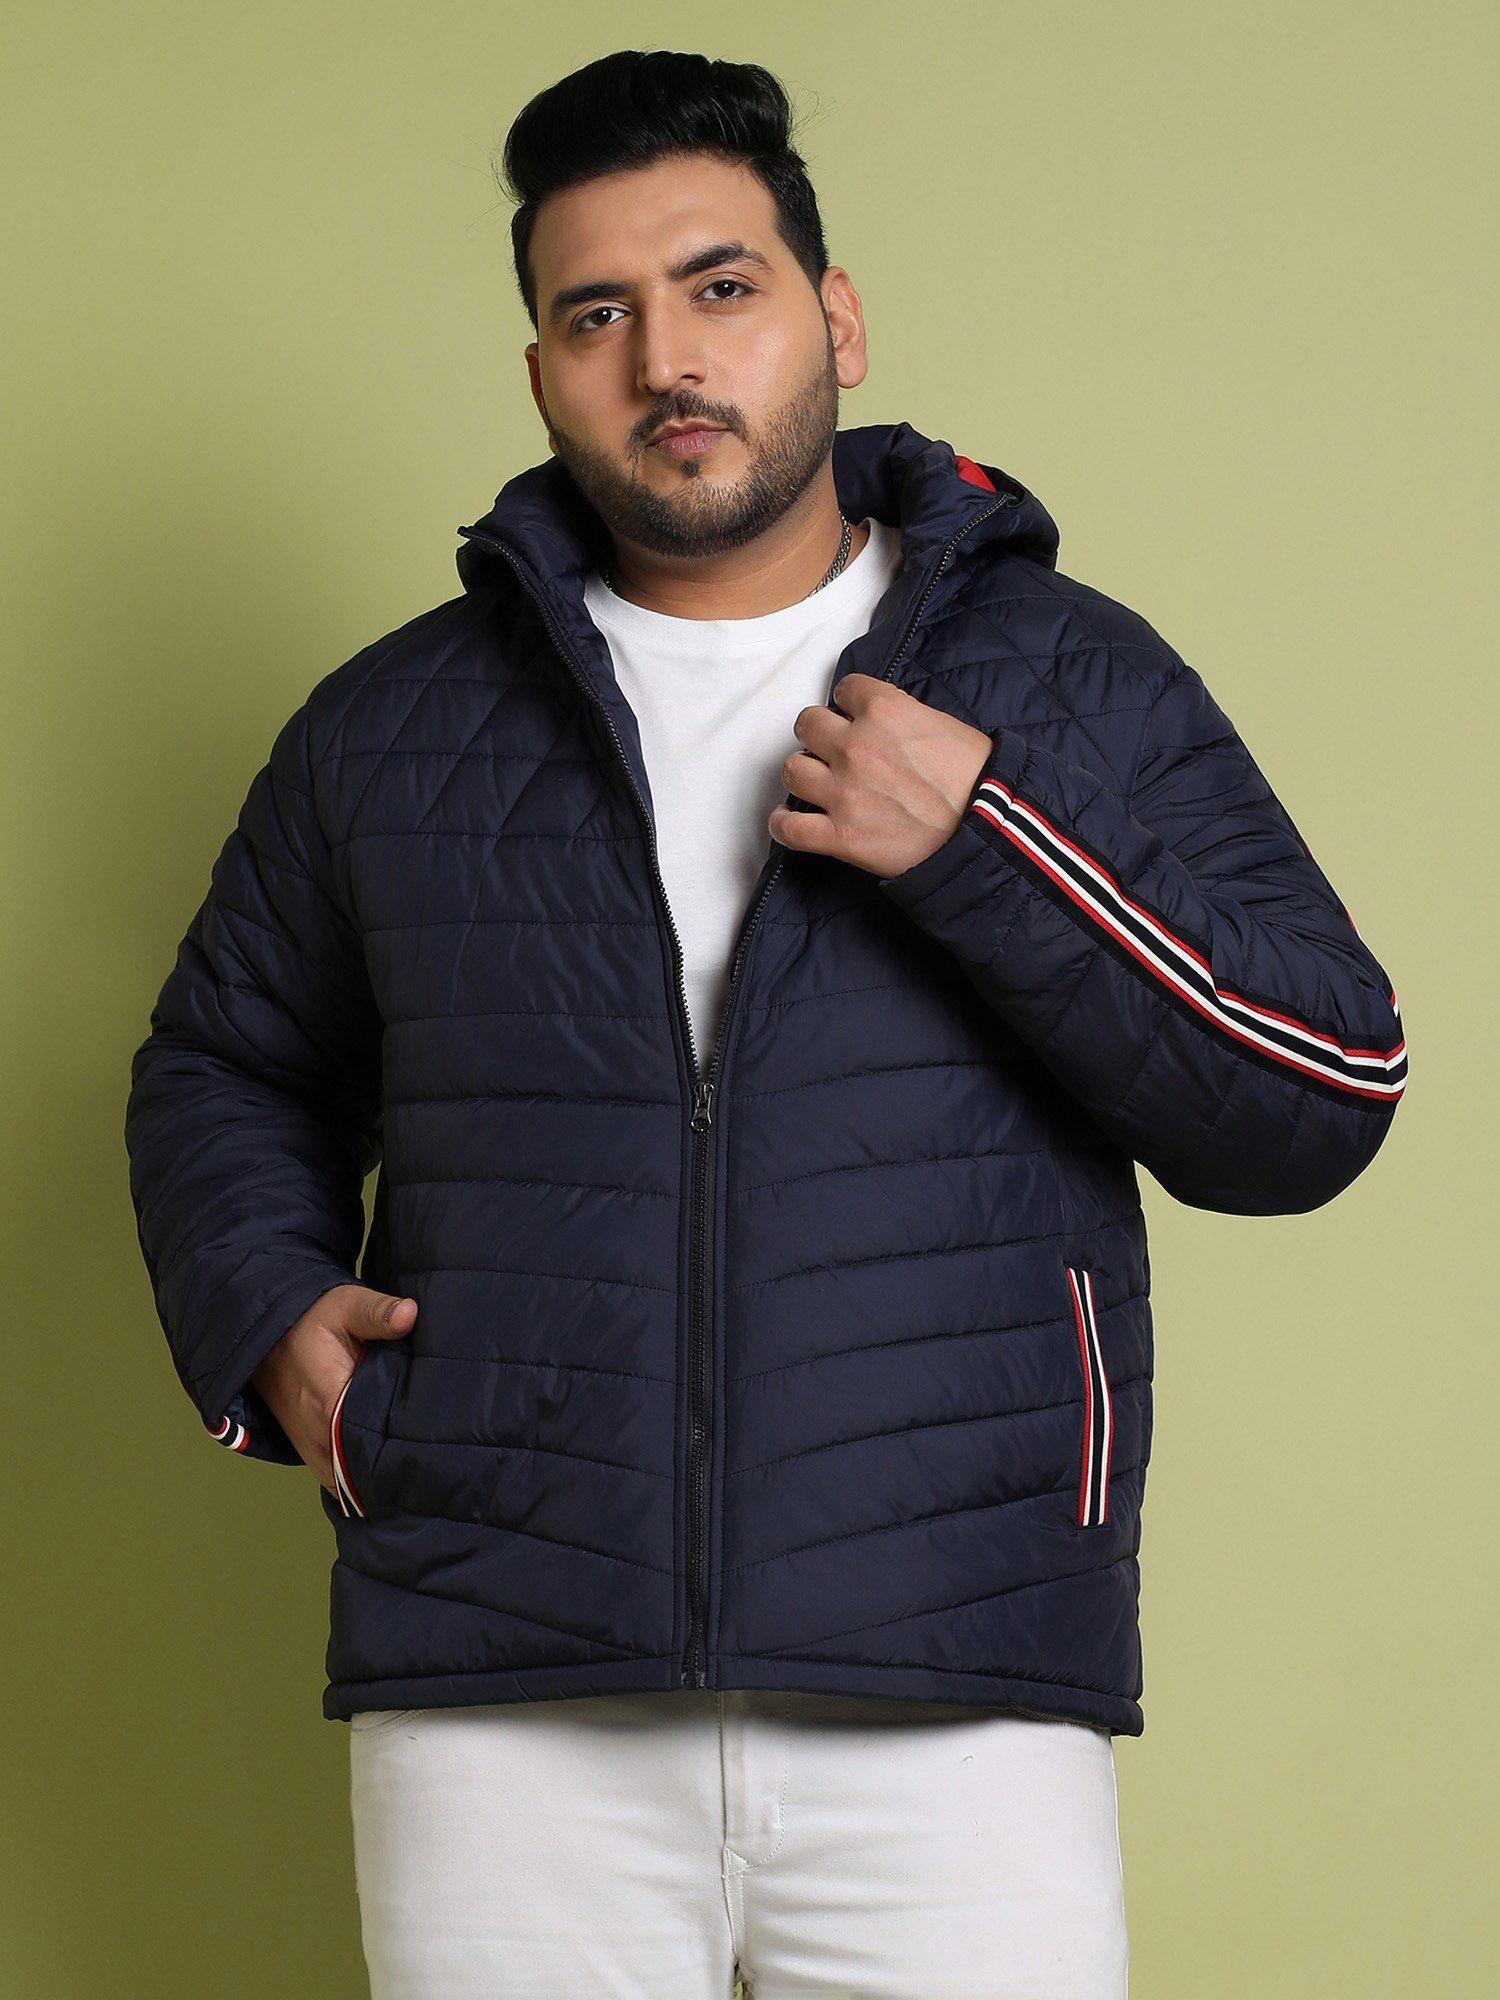 men's-navy-blue-puffer-jacket-with-contrast-striped-sleeve